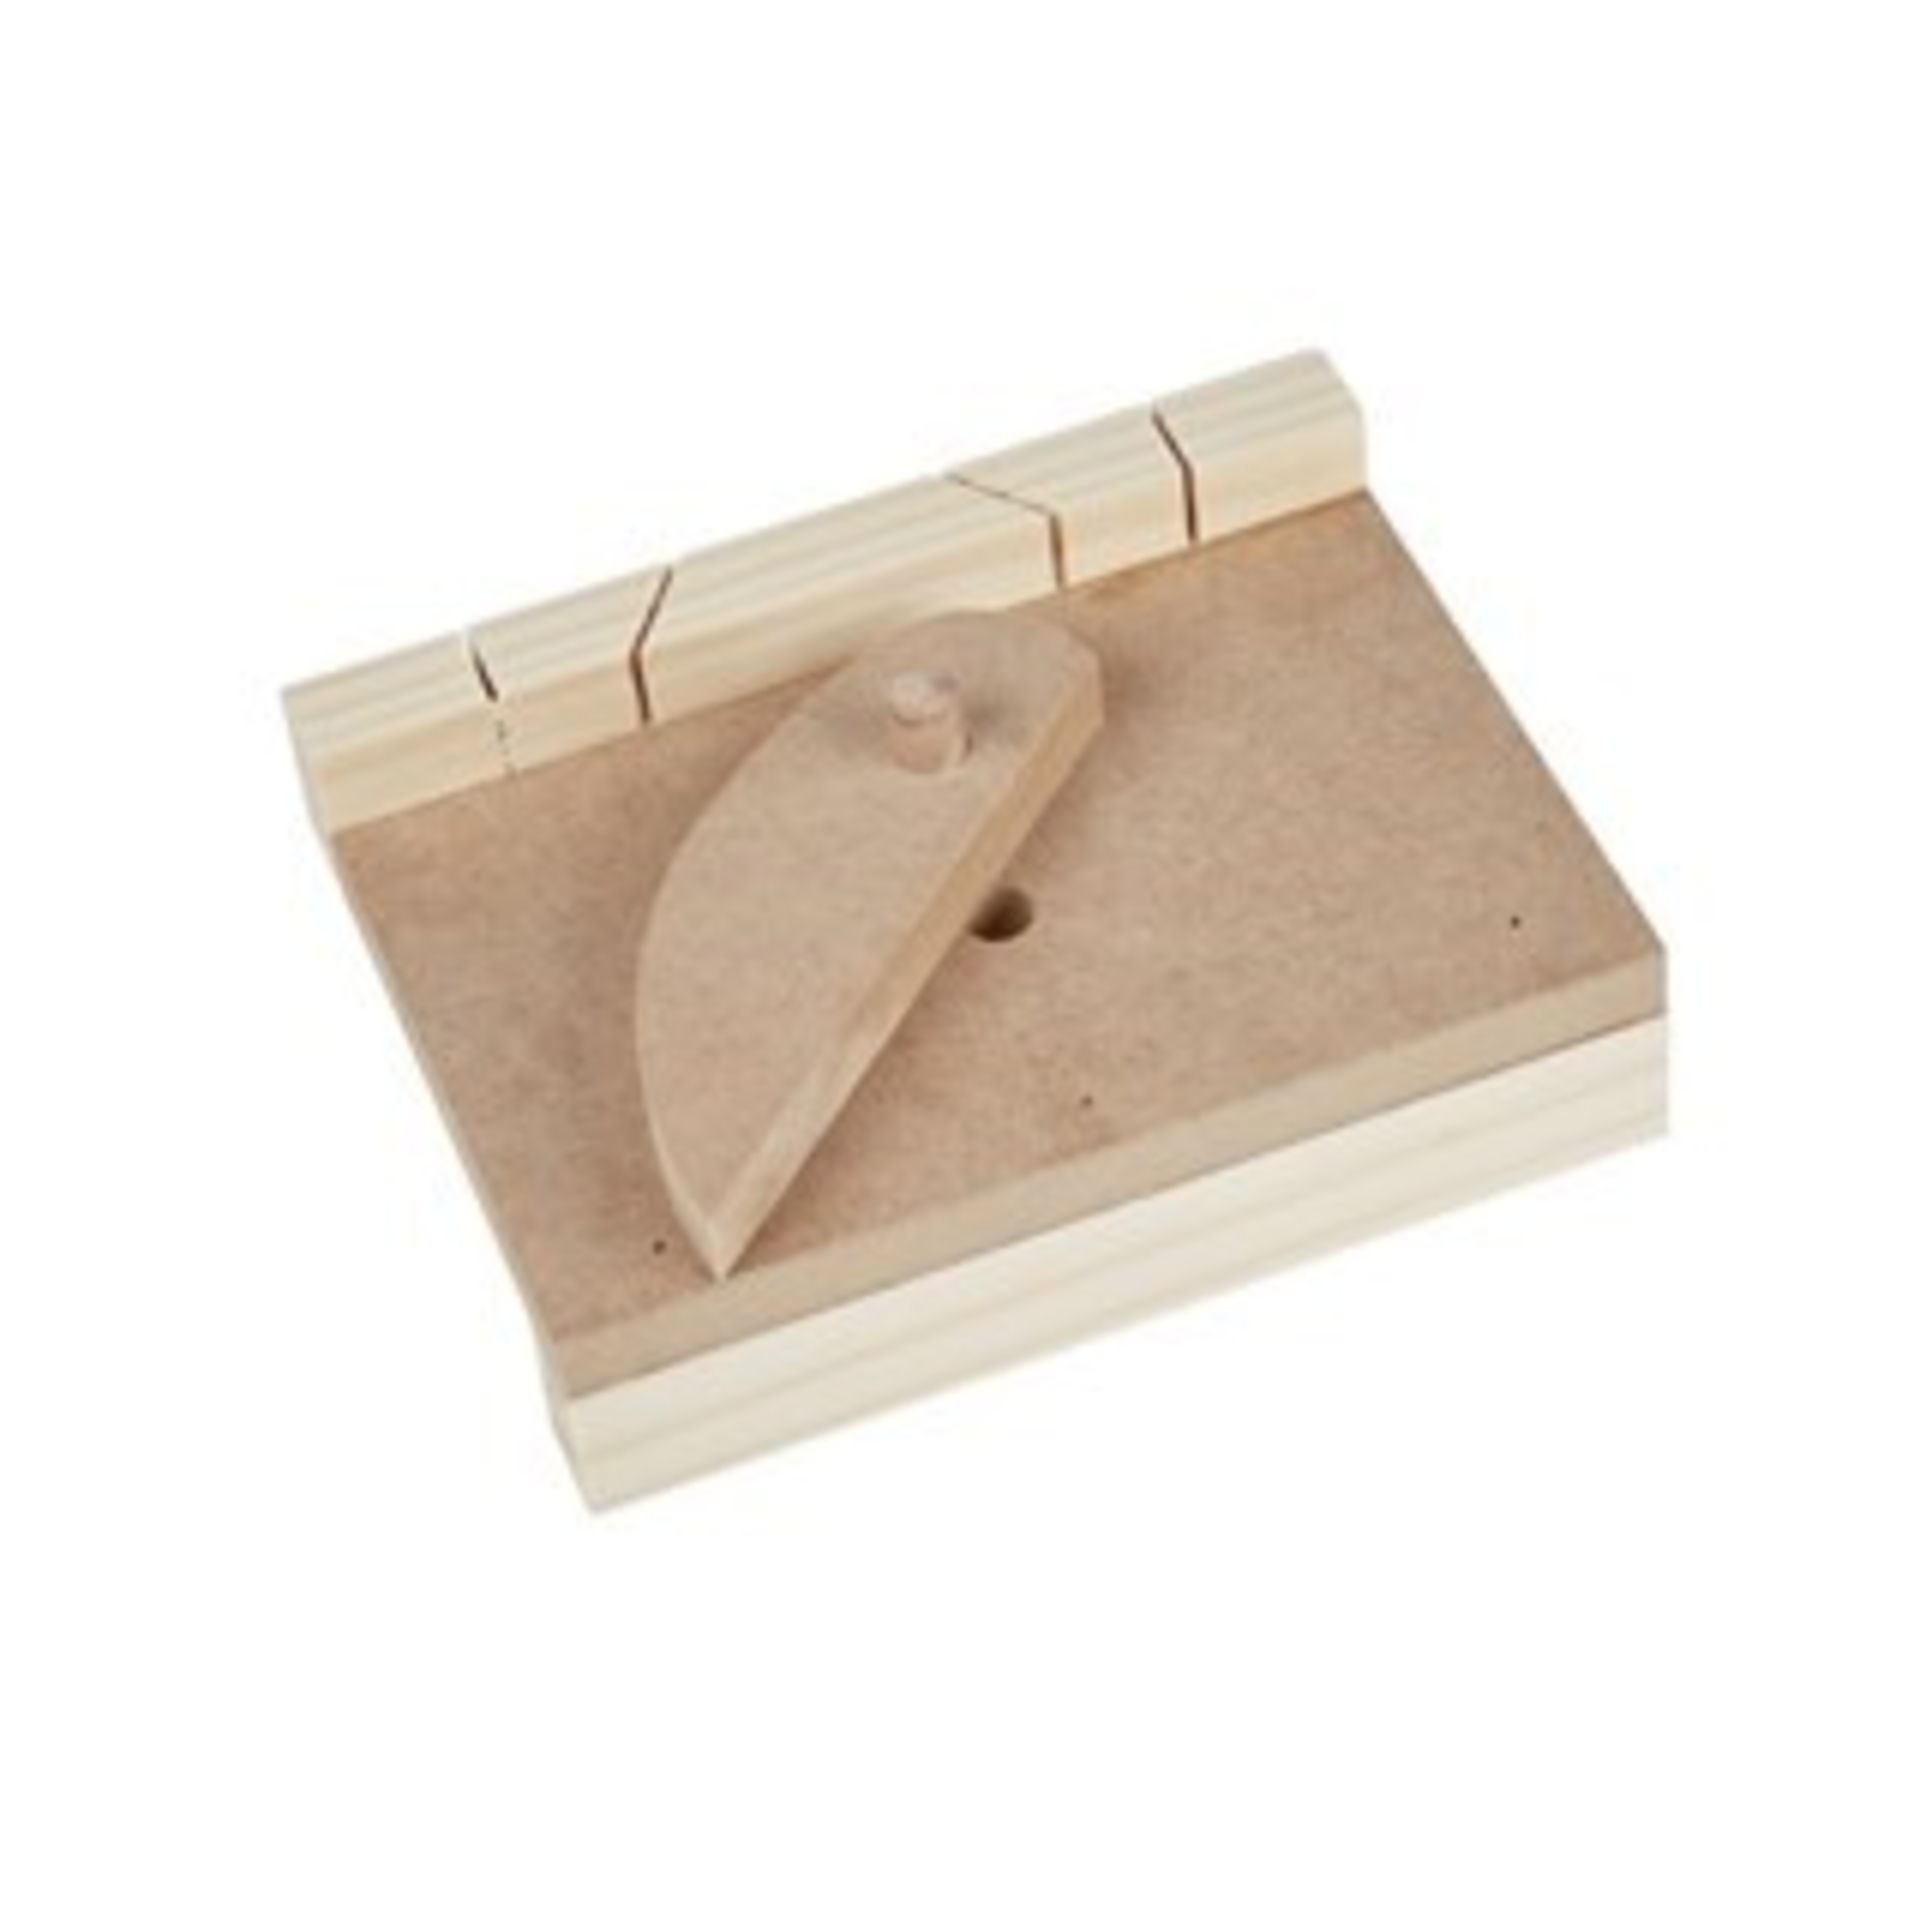 1 LOT TO CONTAIN APRROX 10 BRAND NEW PACKAGED WOODEN CAMOCK CUTTING JIG / COMBINED RRP £80.00 (